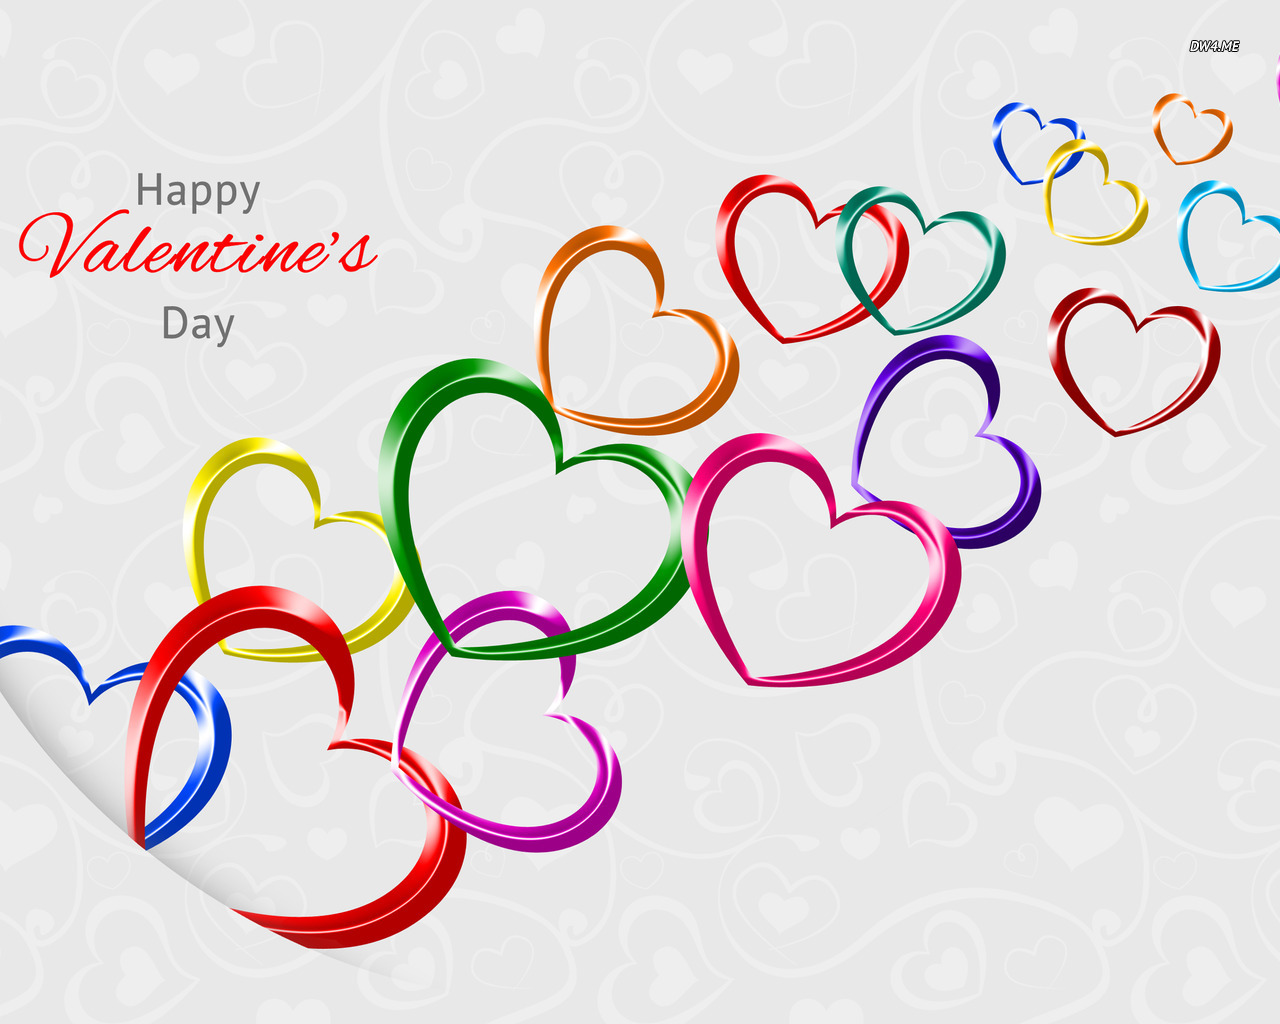 Happy Valentines Day wallpaper   Holiday wallpapers   2140